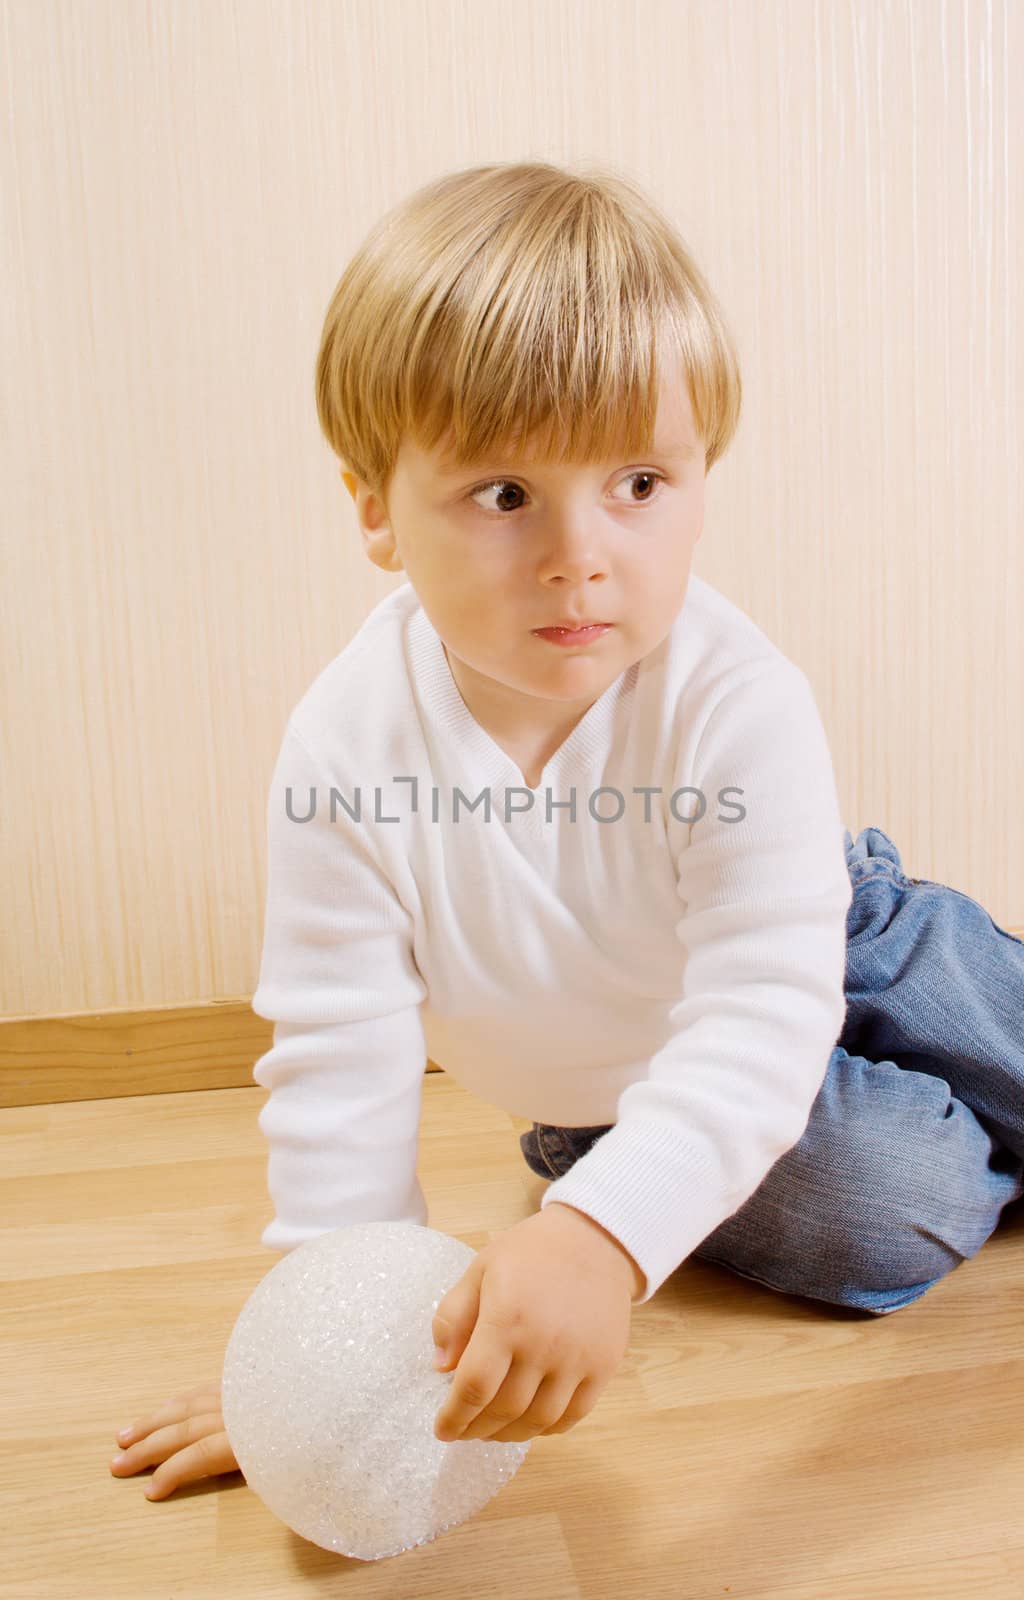 The child on the wood floor with white ball by BIG_TAU